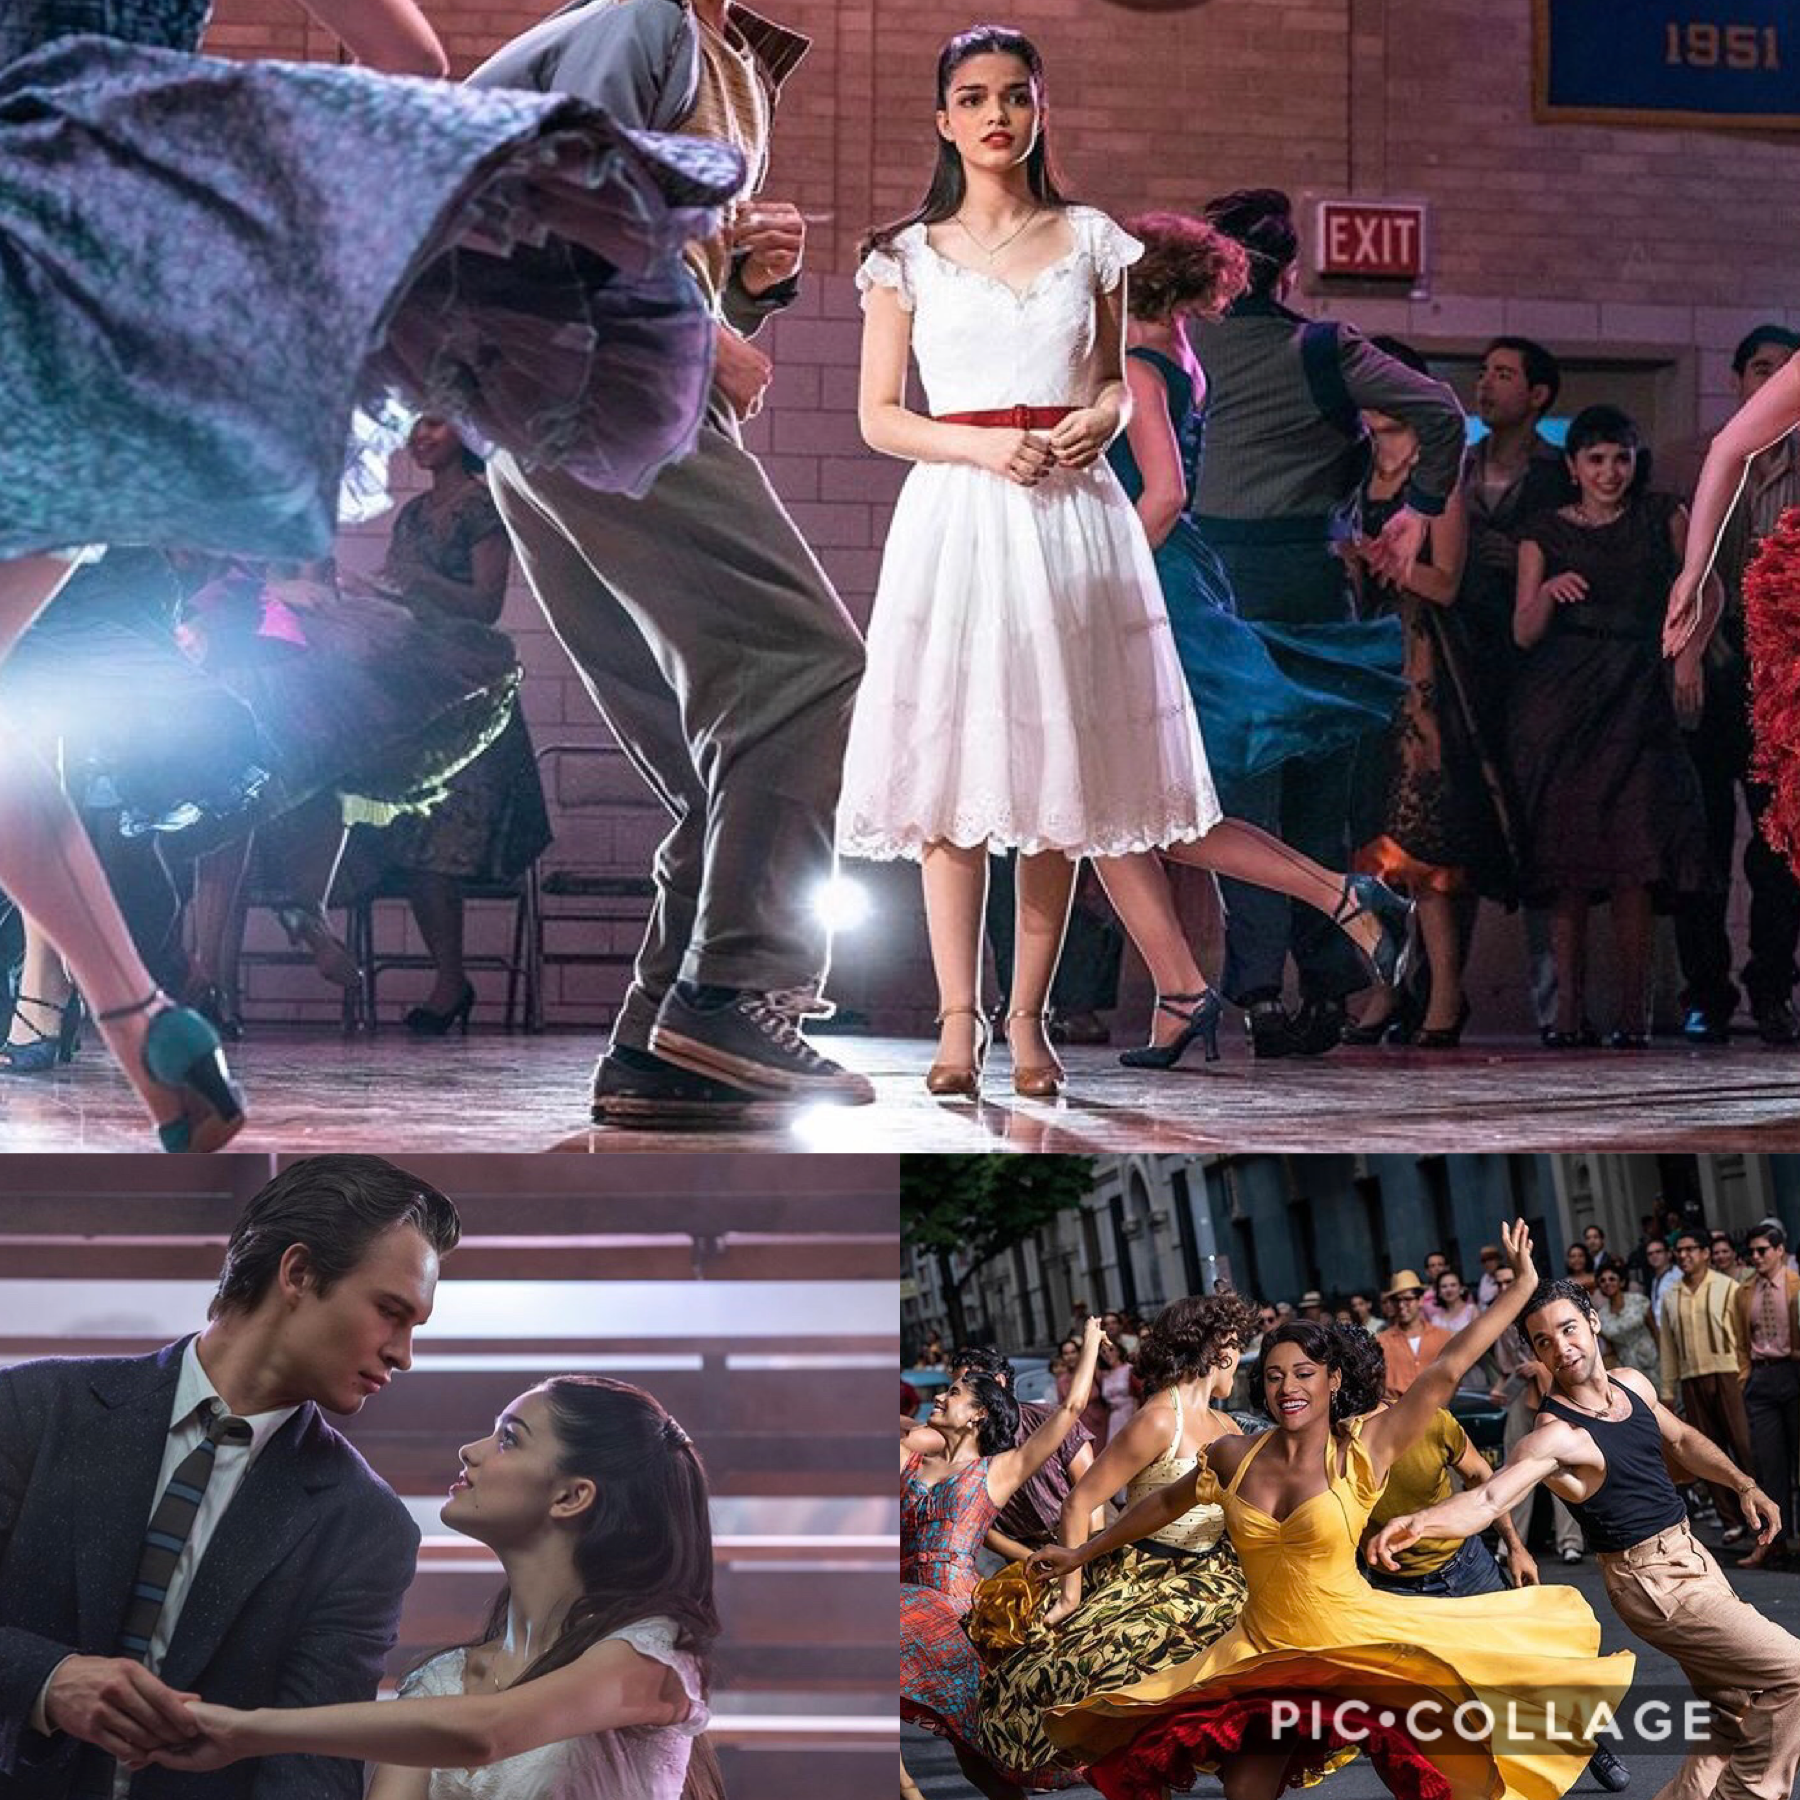 i’m so excited for the west side story remake in December 😭